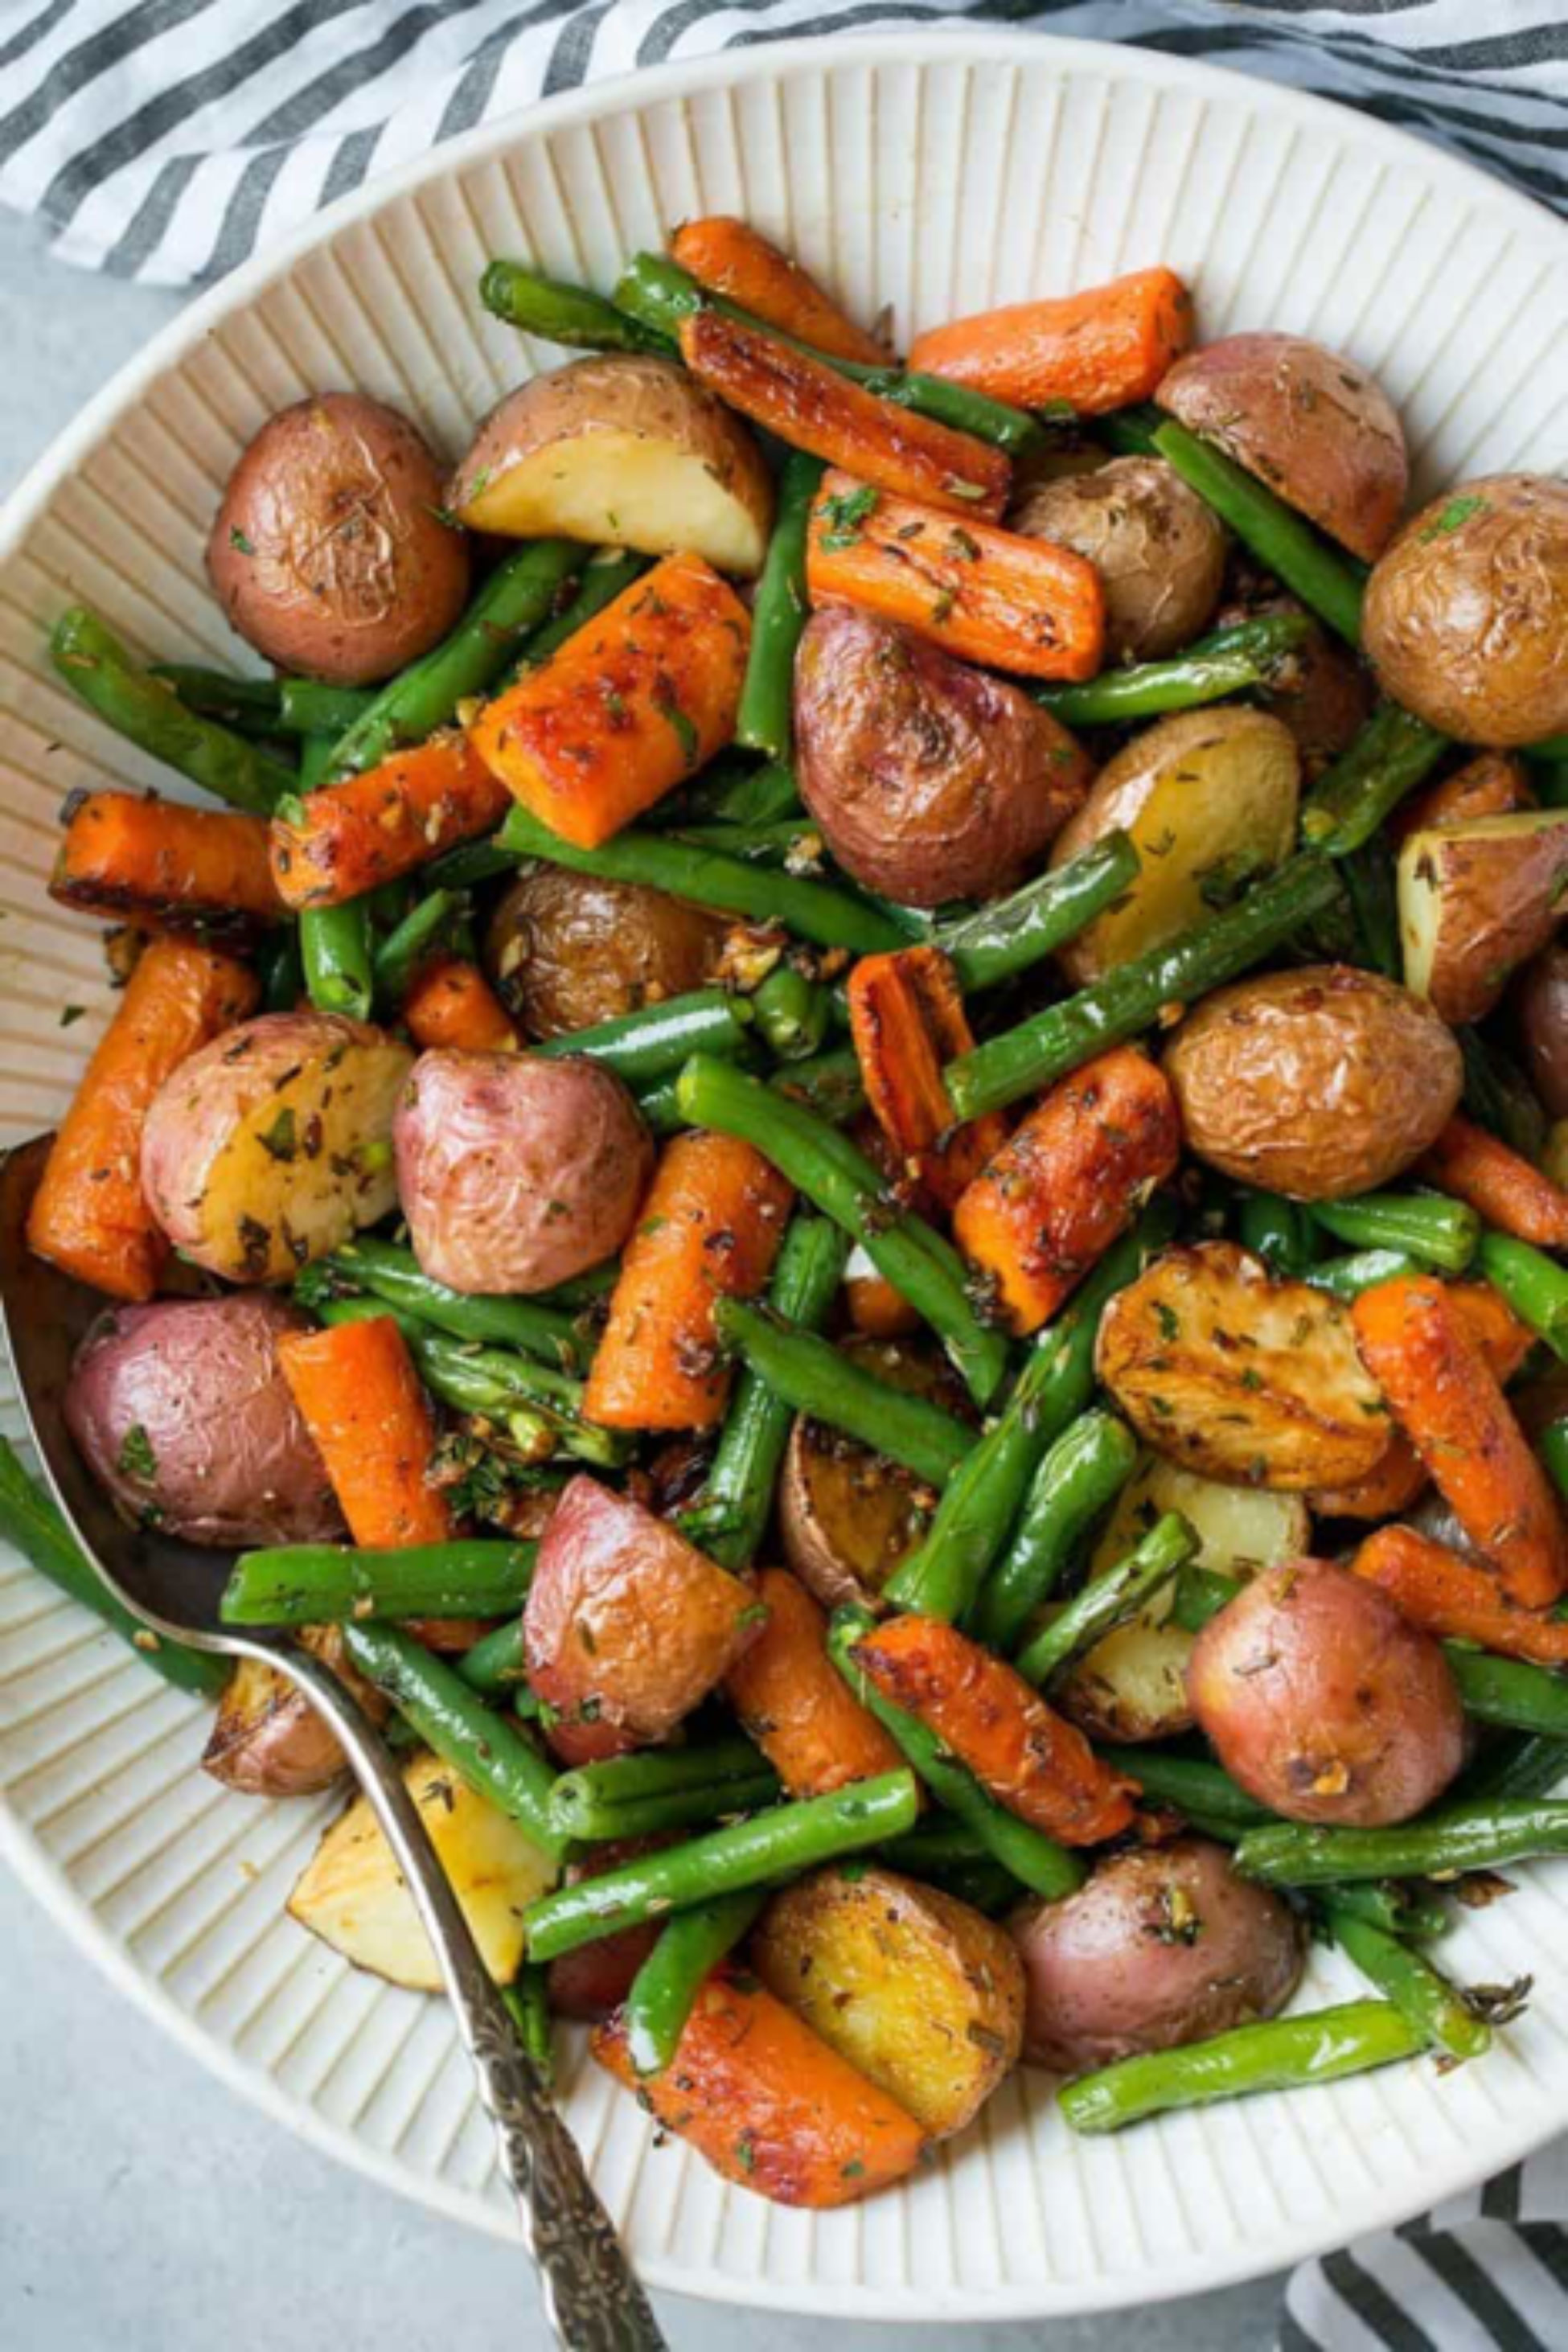 Garlic-Herb-Roasted-Potatoes-Carrots-and-Green-Beans